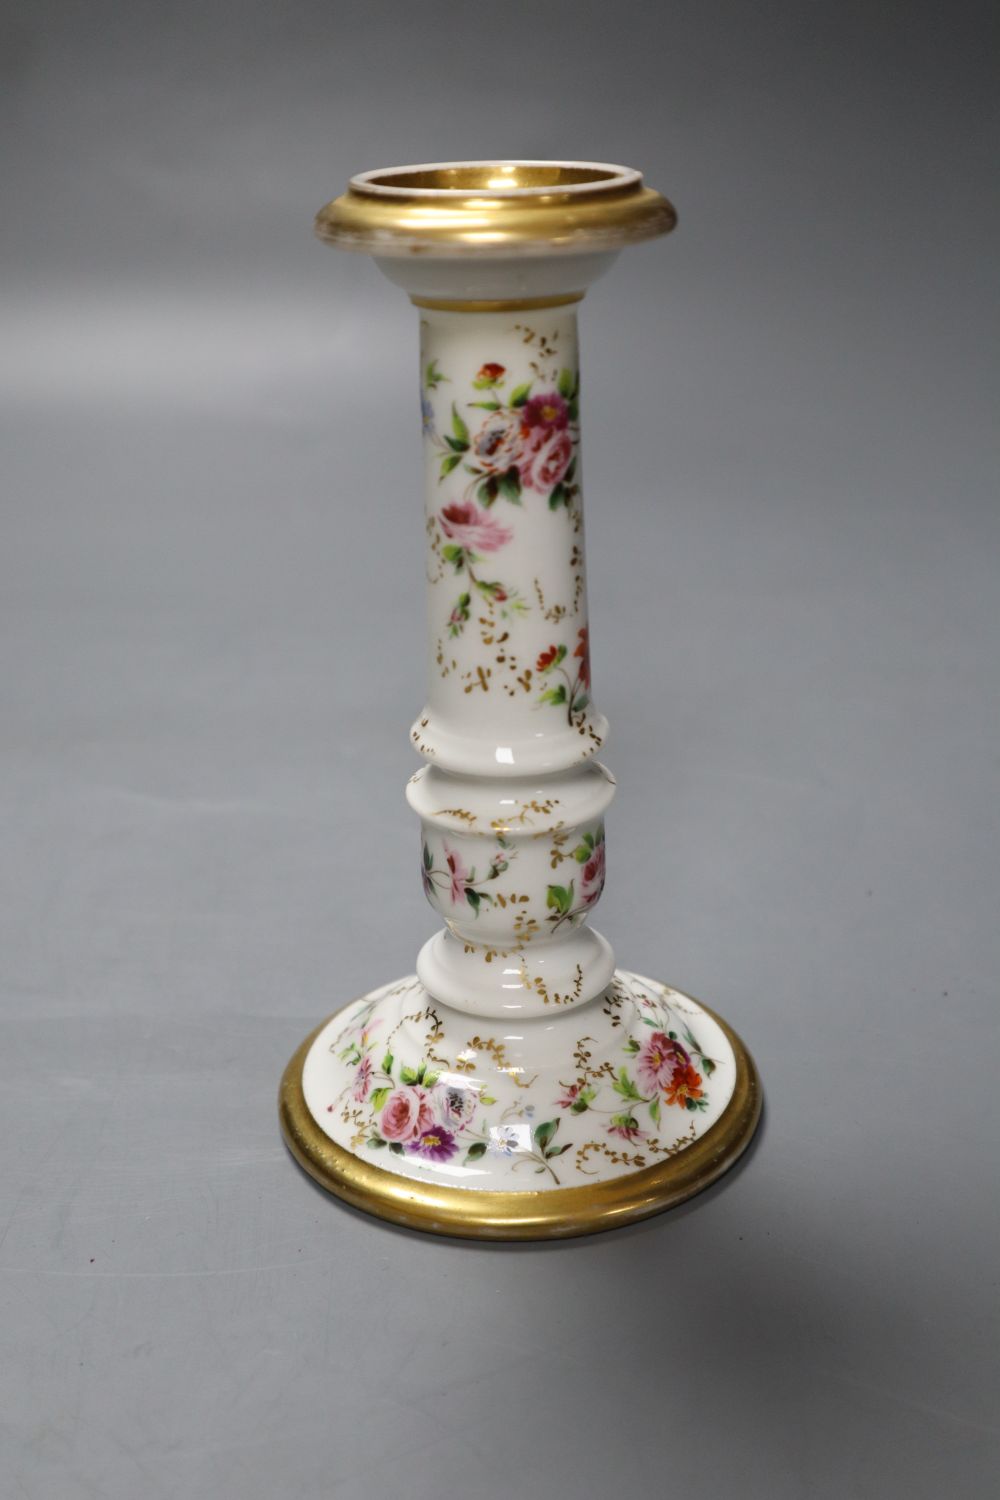 Joseph Petit. A floral and gilt decorated candlestick, height 16cm